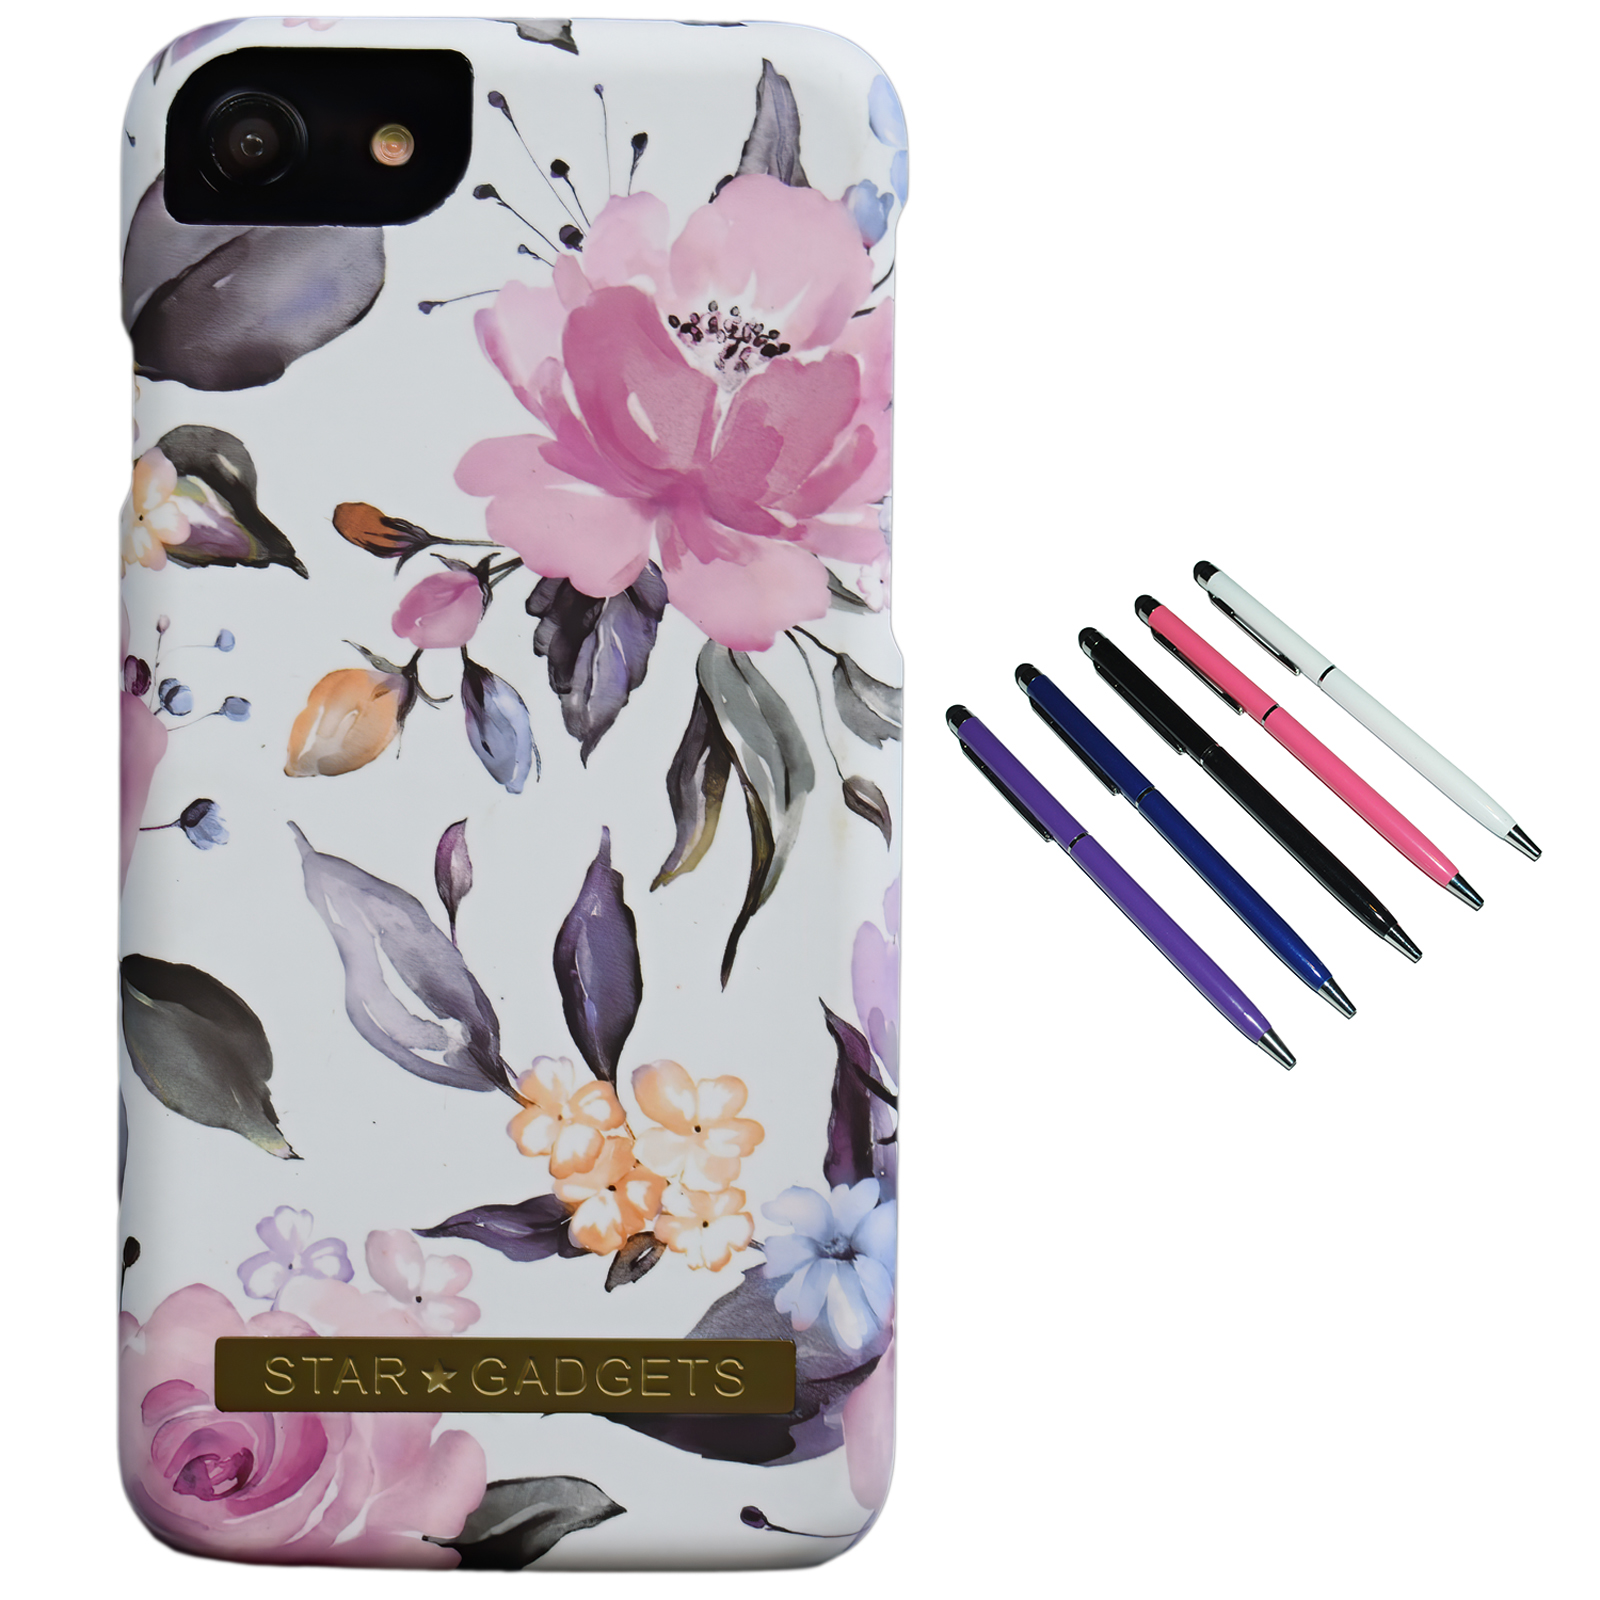 iPhone 7/8/SE (2020) - Case Protection Flower